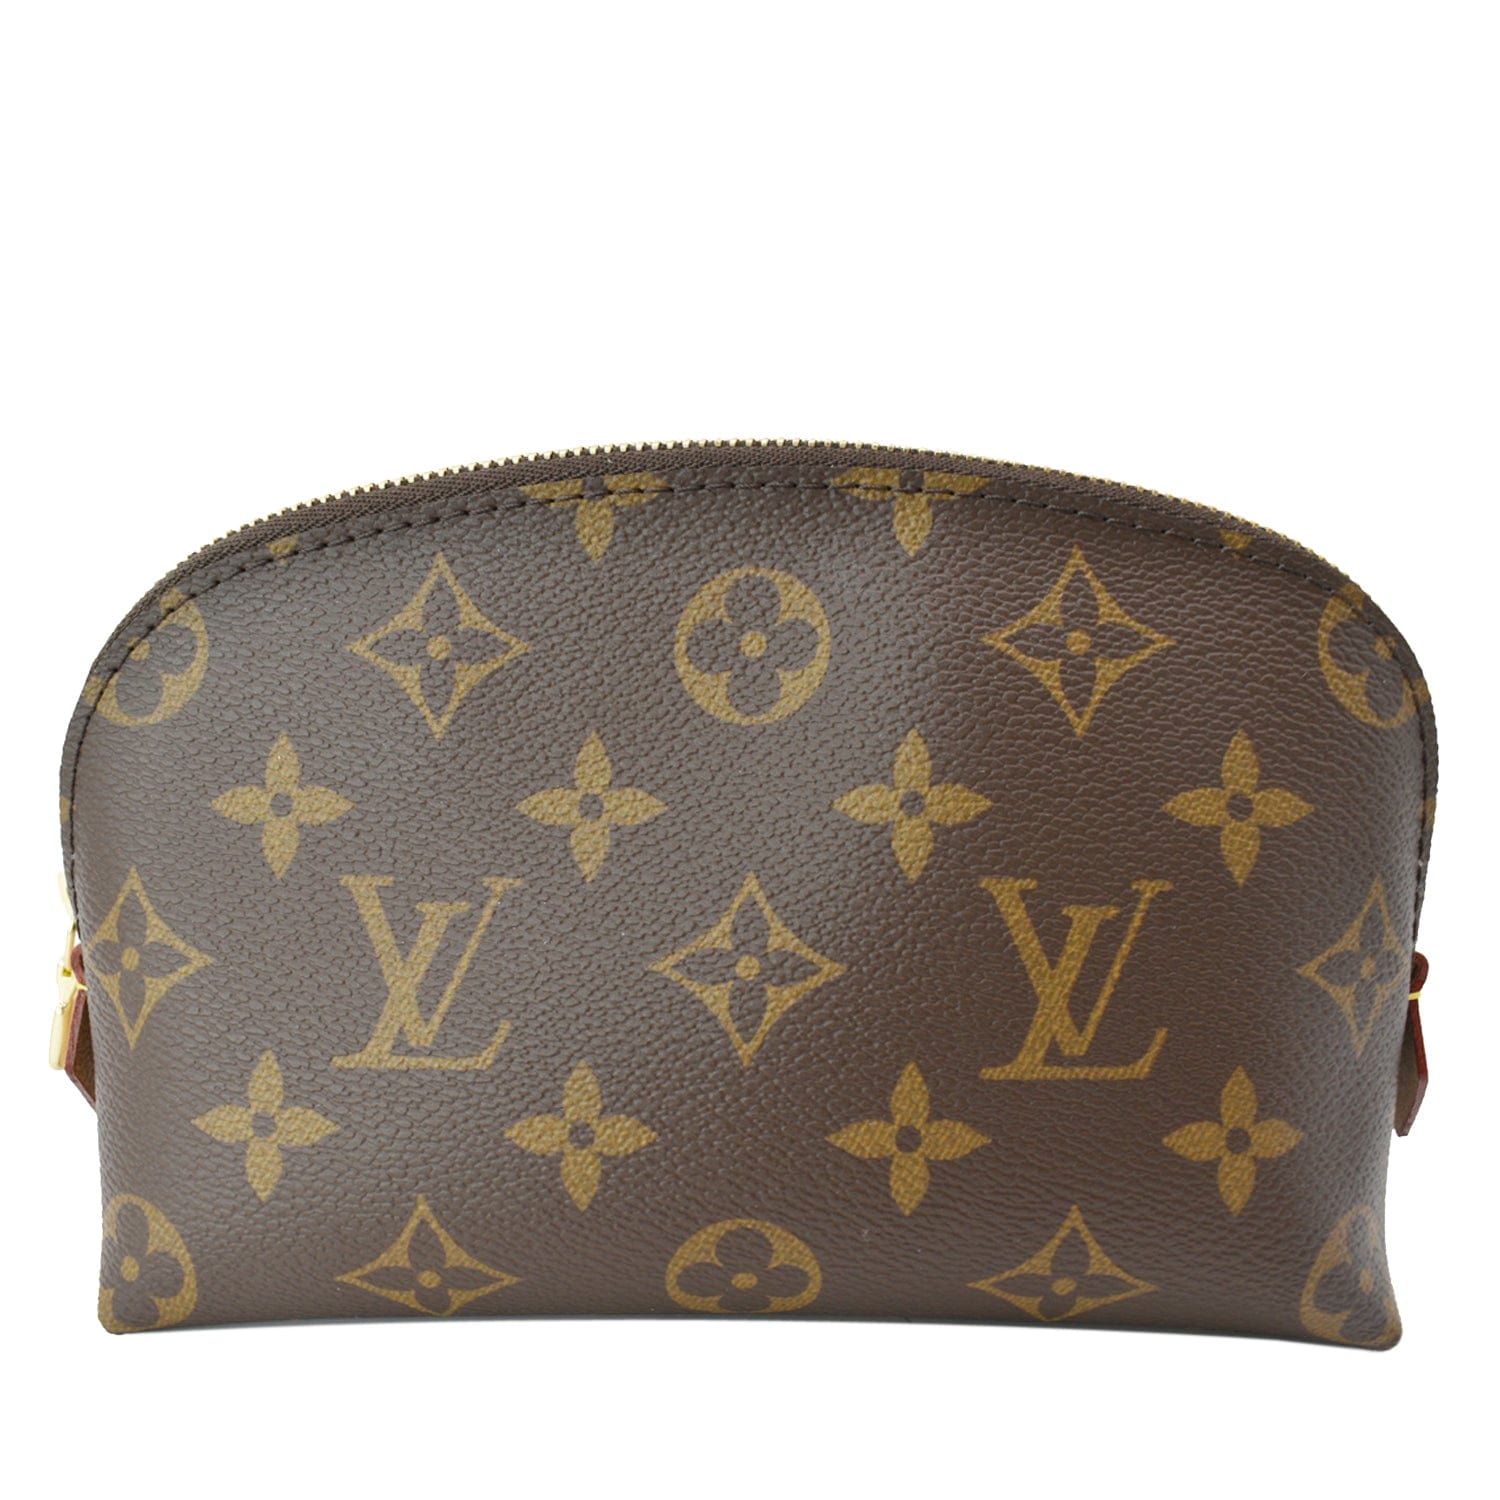 Louis Vuitton Monogram Canvas Cosmetic Pouch in Brown